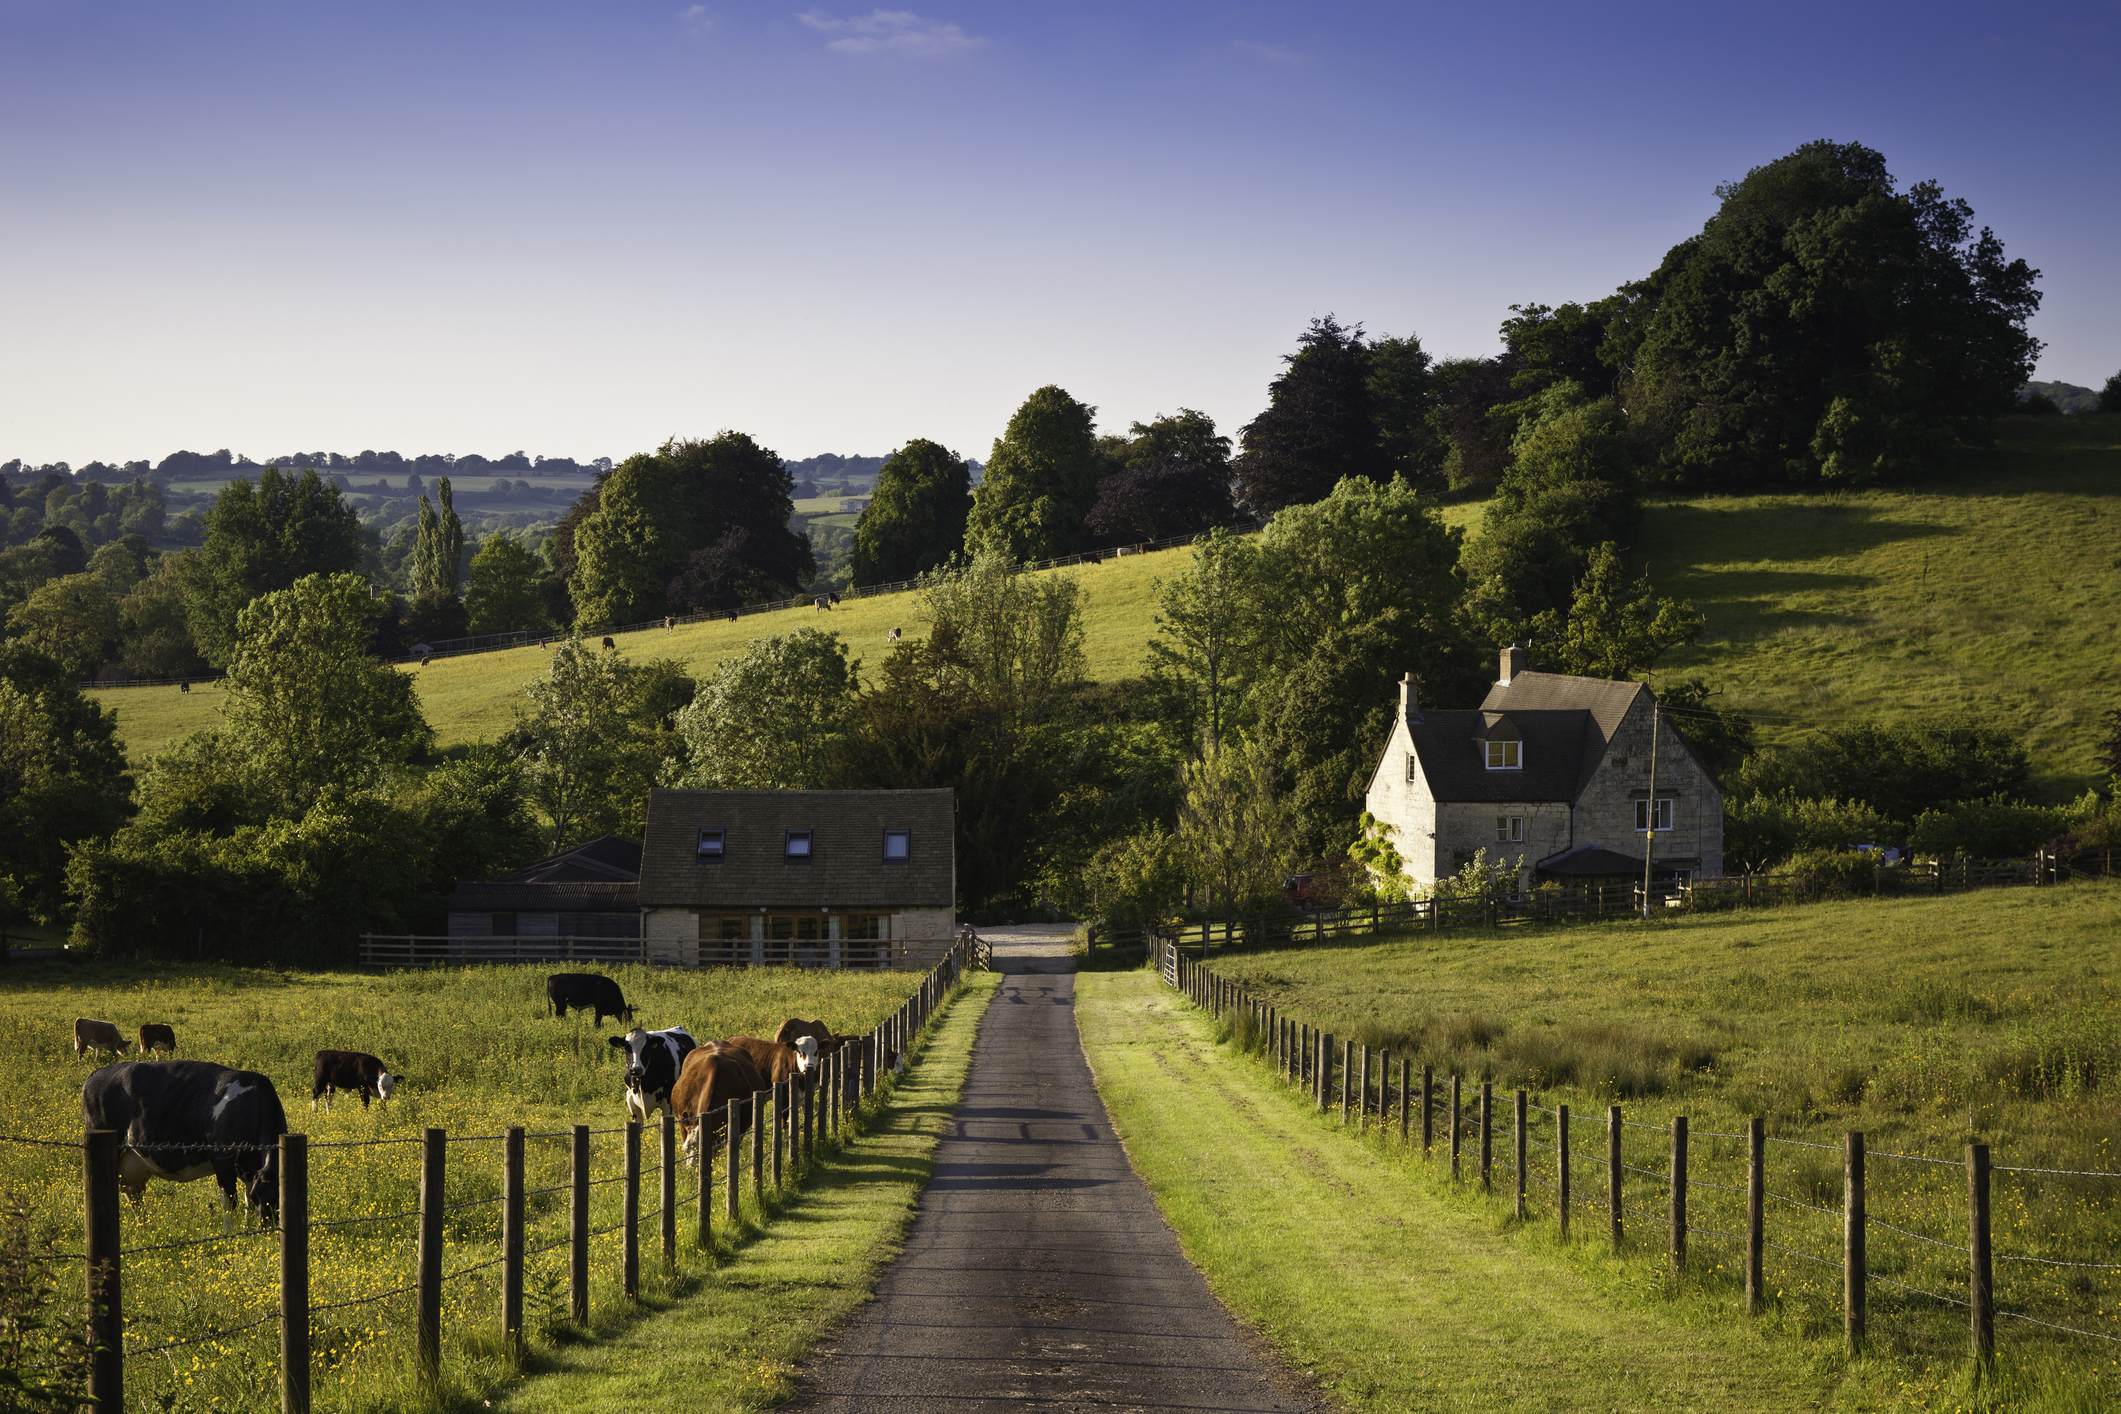 Rural areas have higher self-employment rates, says Rural Economy ...